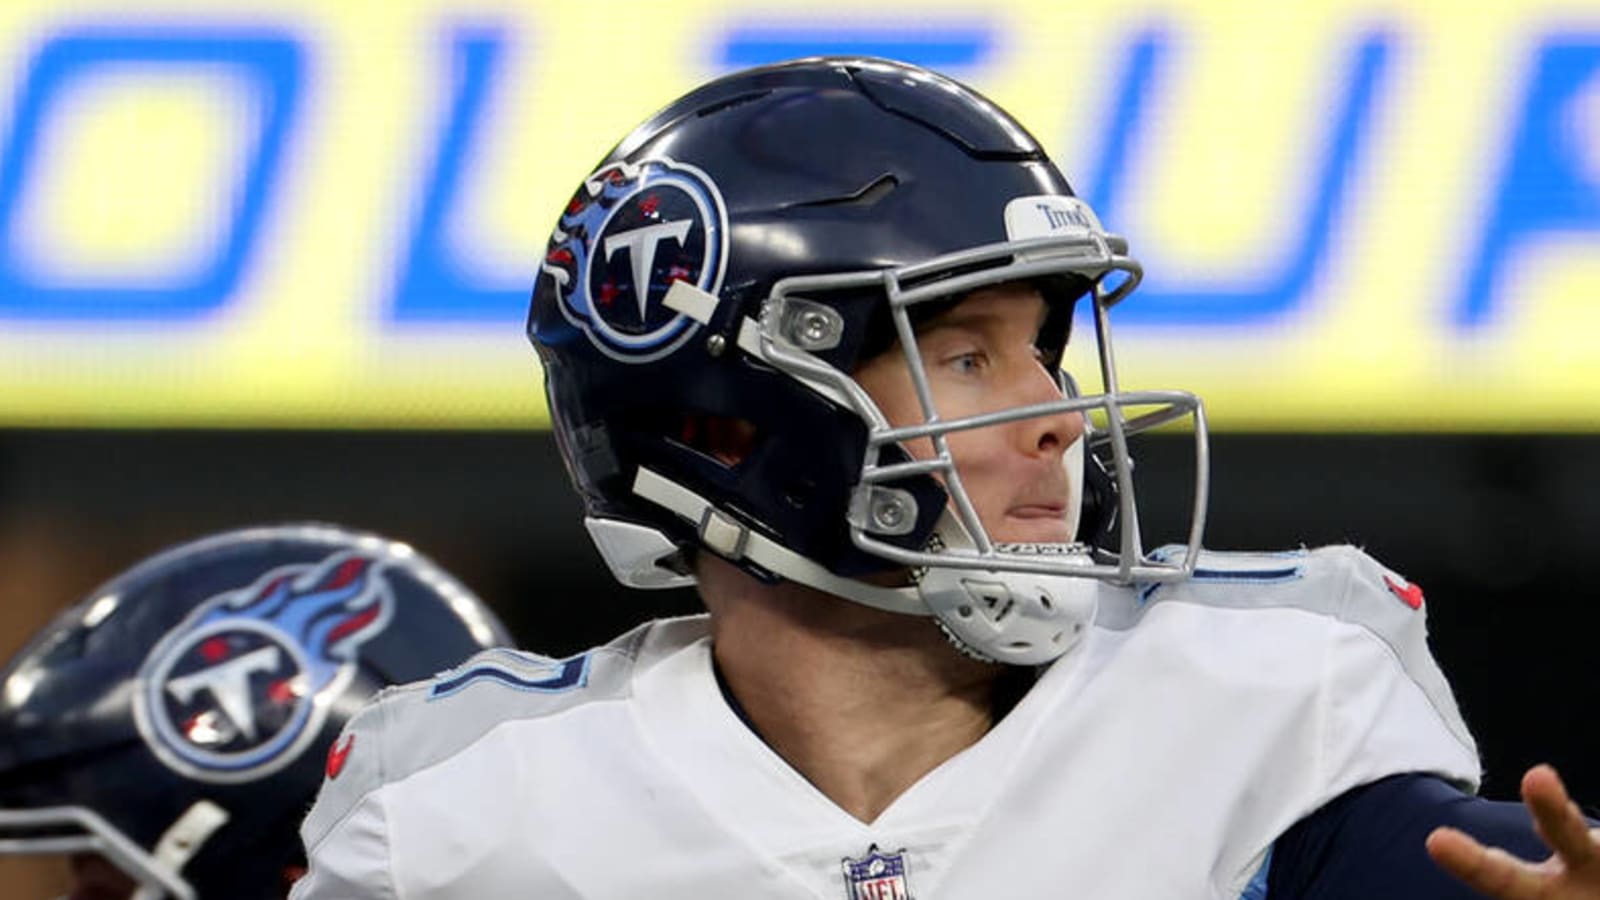 Titans' Tannehill will likely miss rest of season